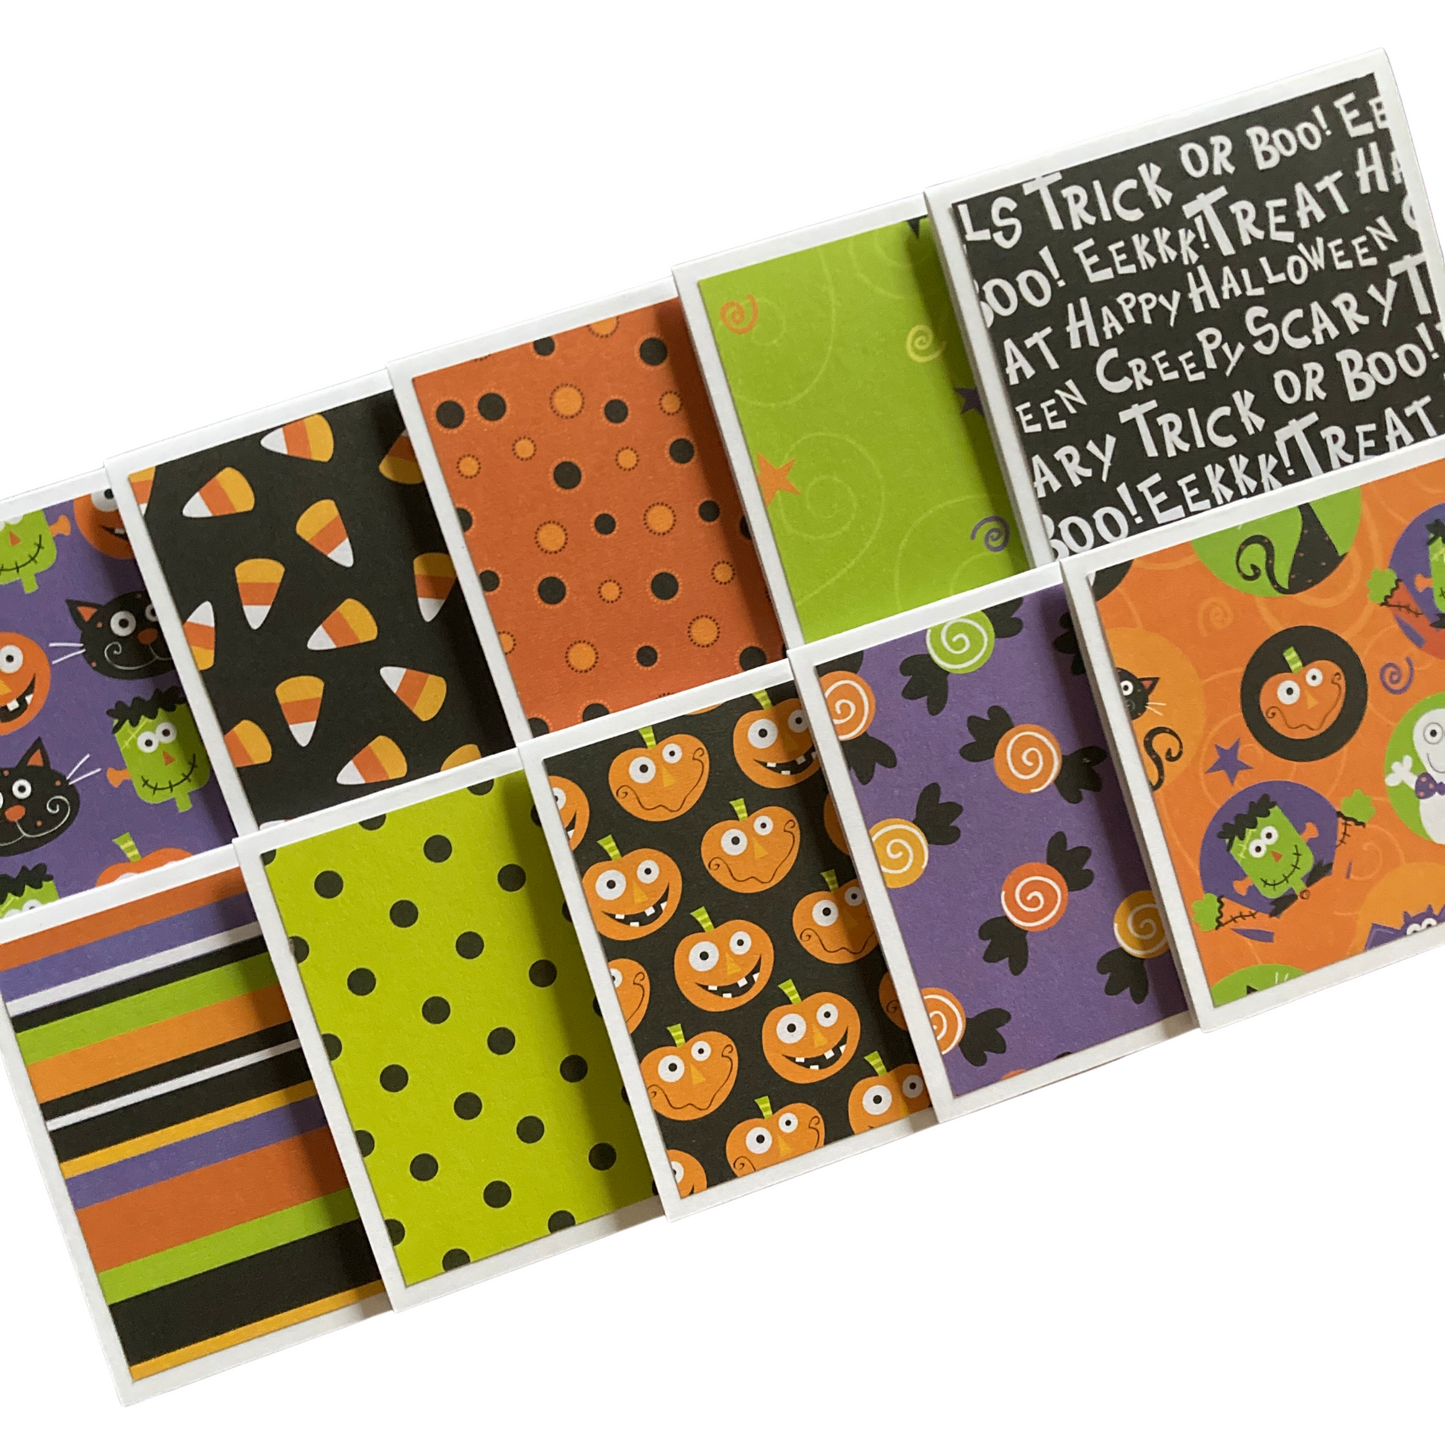 3x3 Trick or Treat Note Cards